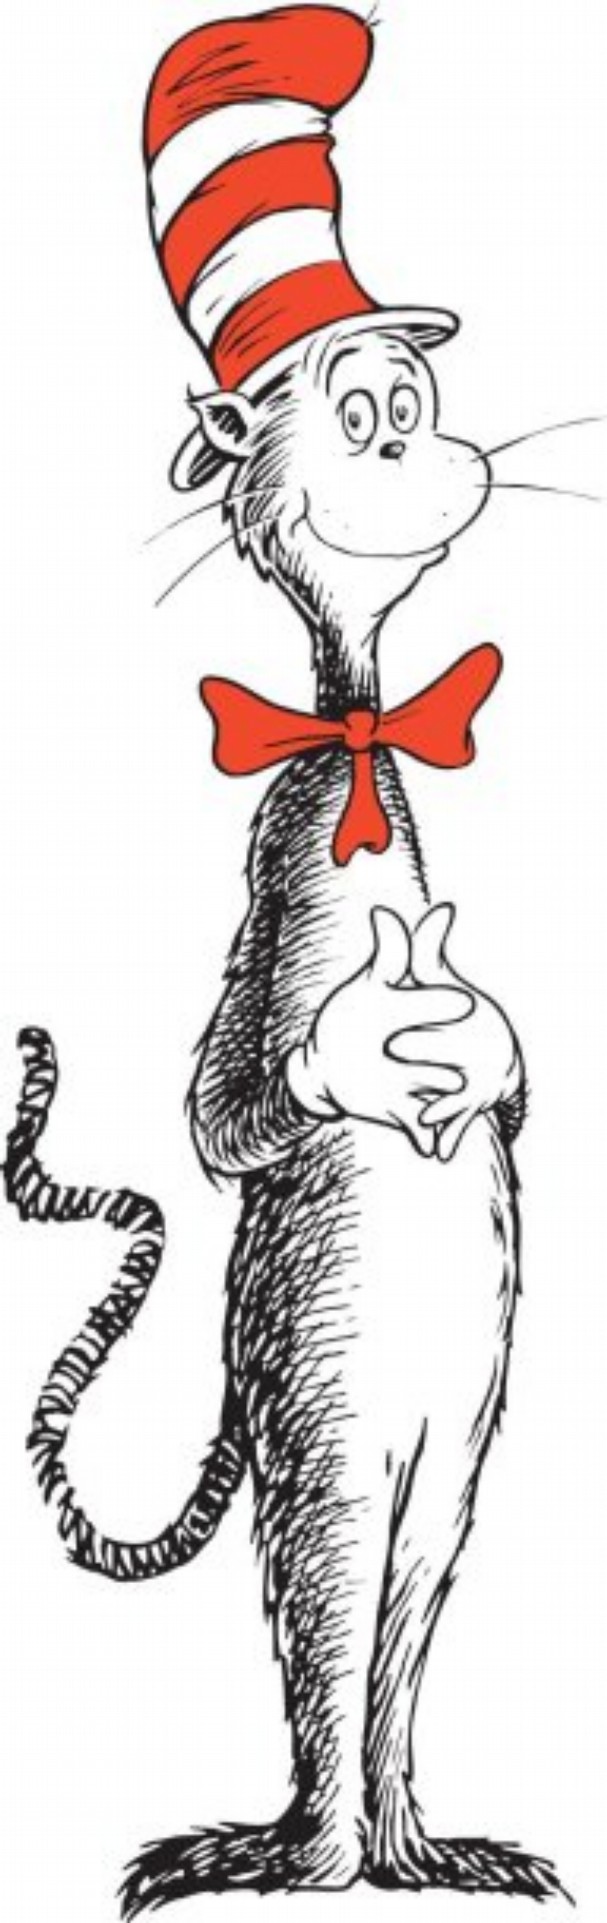 Cat in the hat clip art free dr seuss images 